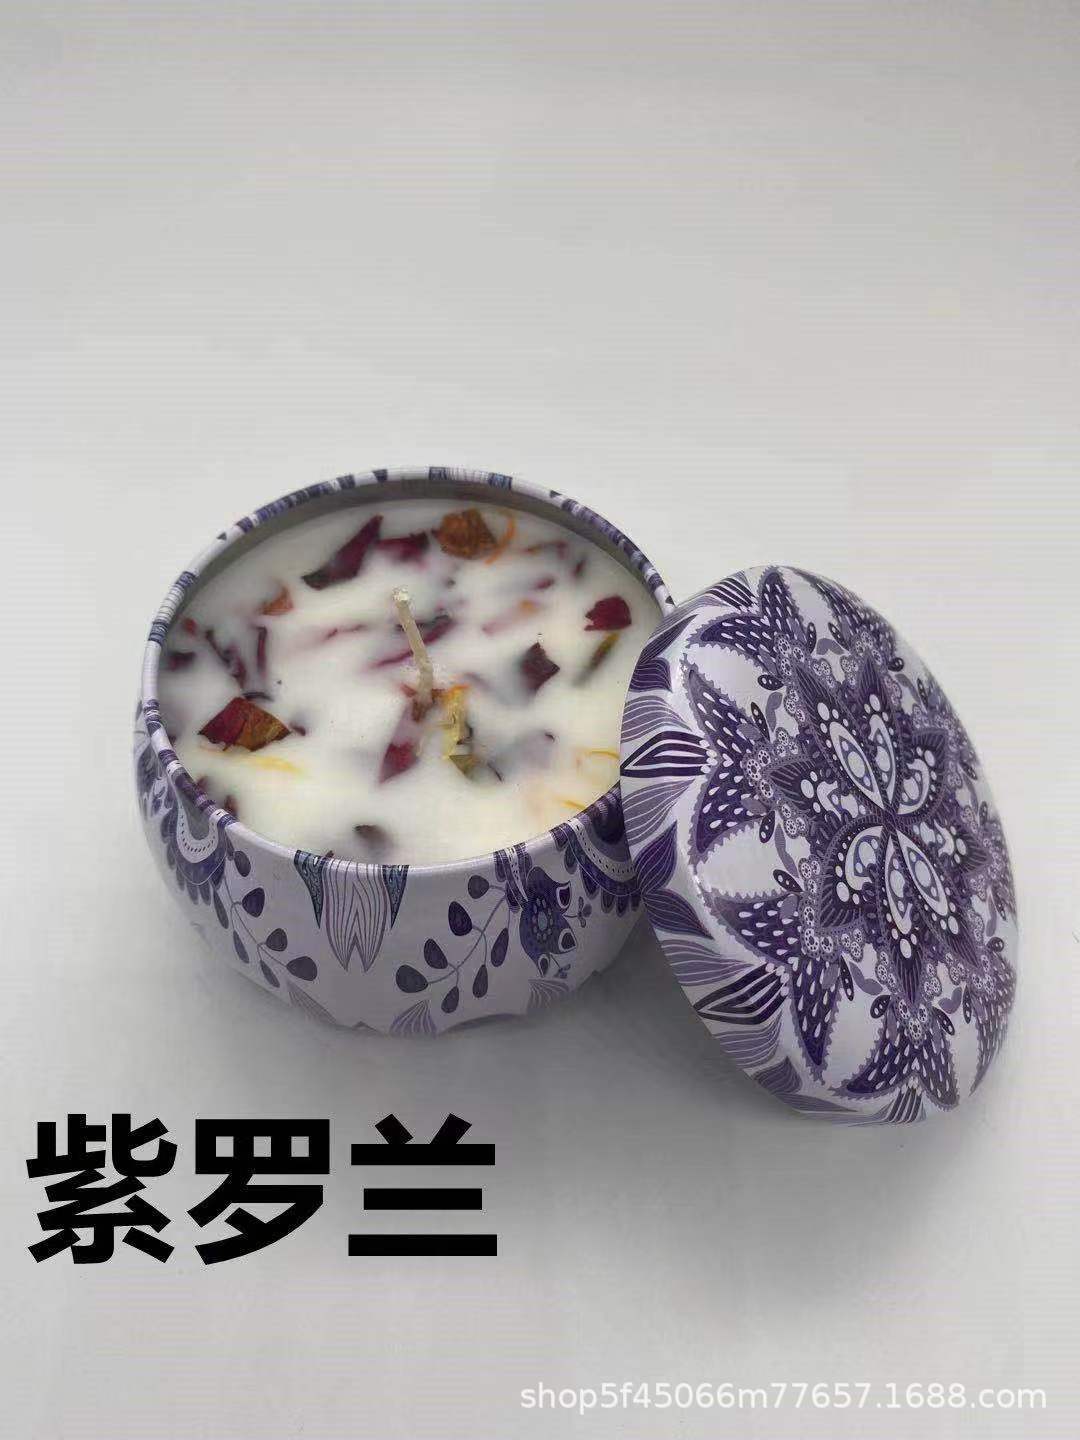 Dried Soy Wax Flower Fragrance Candles? Wedding Partner Fireworks Display Fragrance Incense Candle